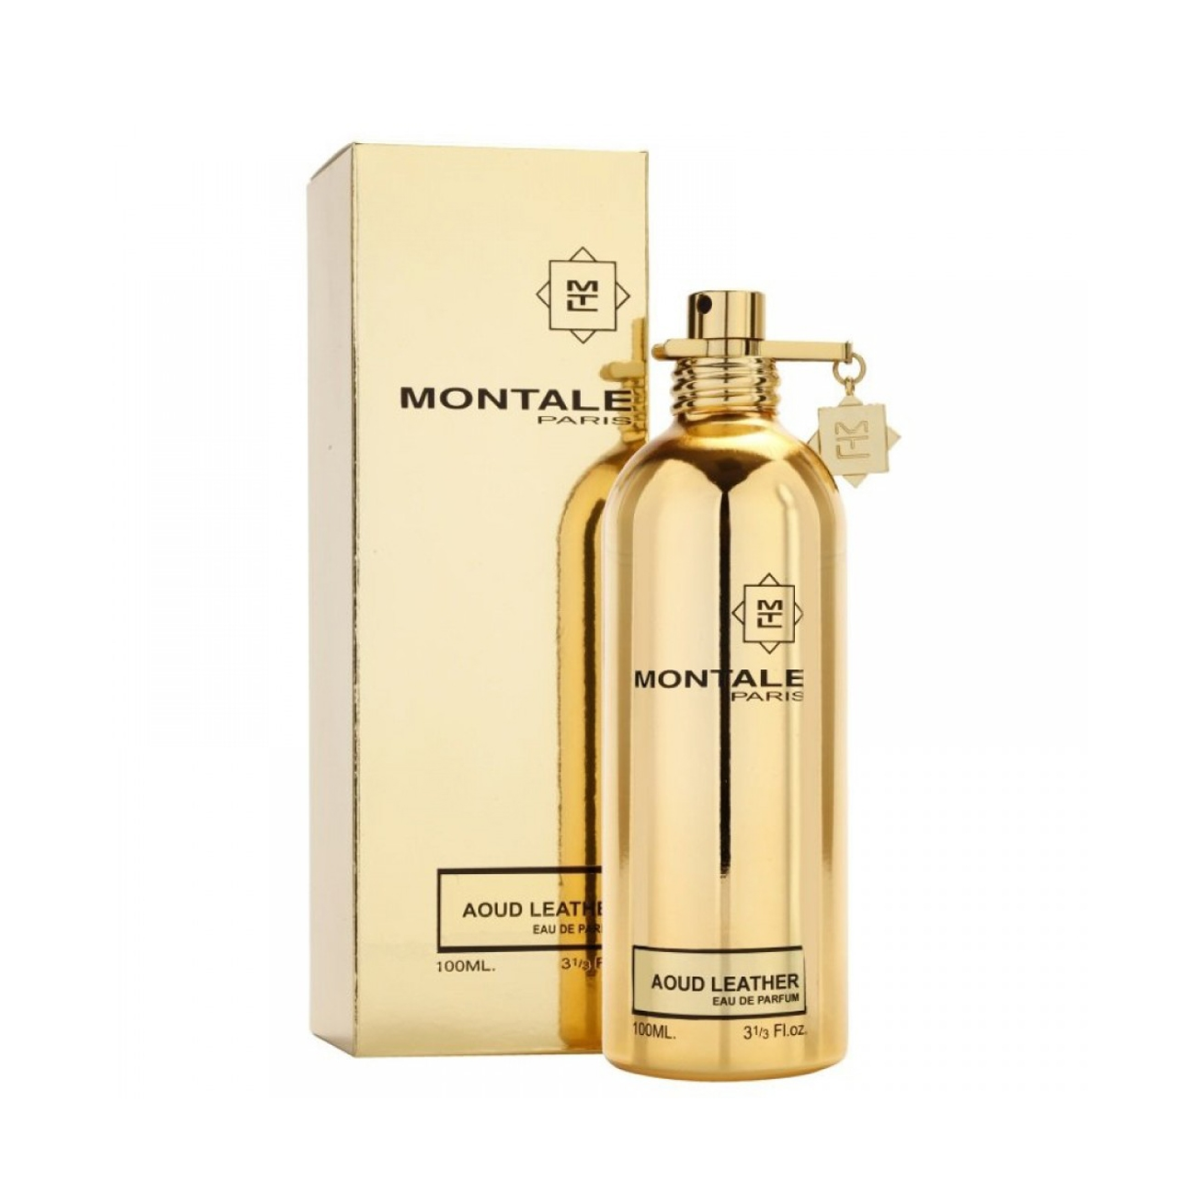 AOUD LEATHER MONTALE